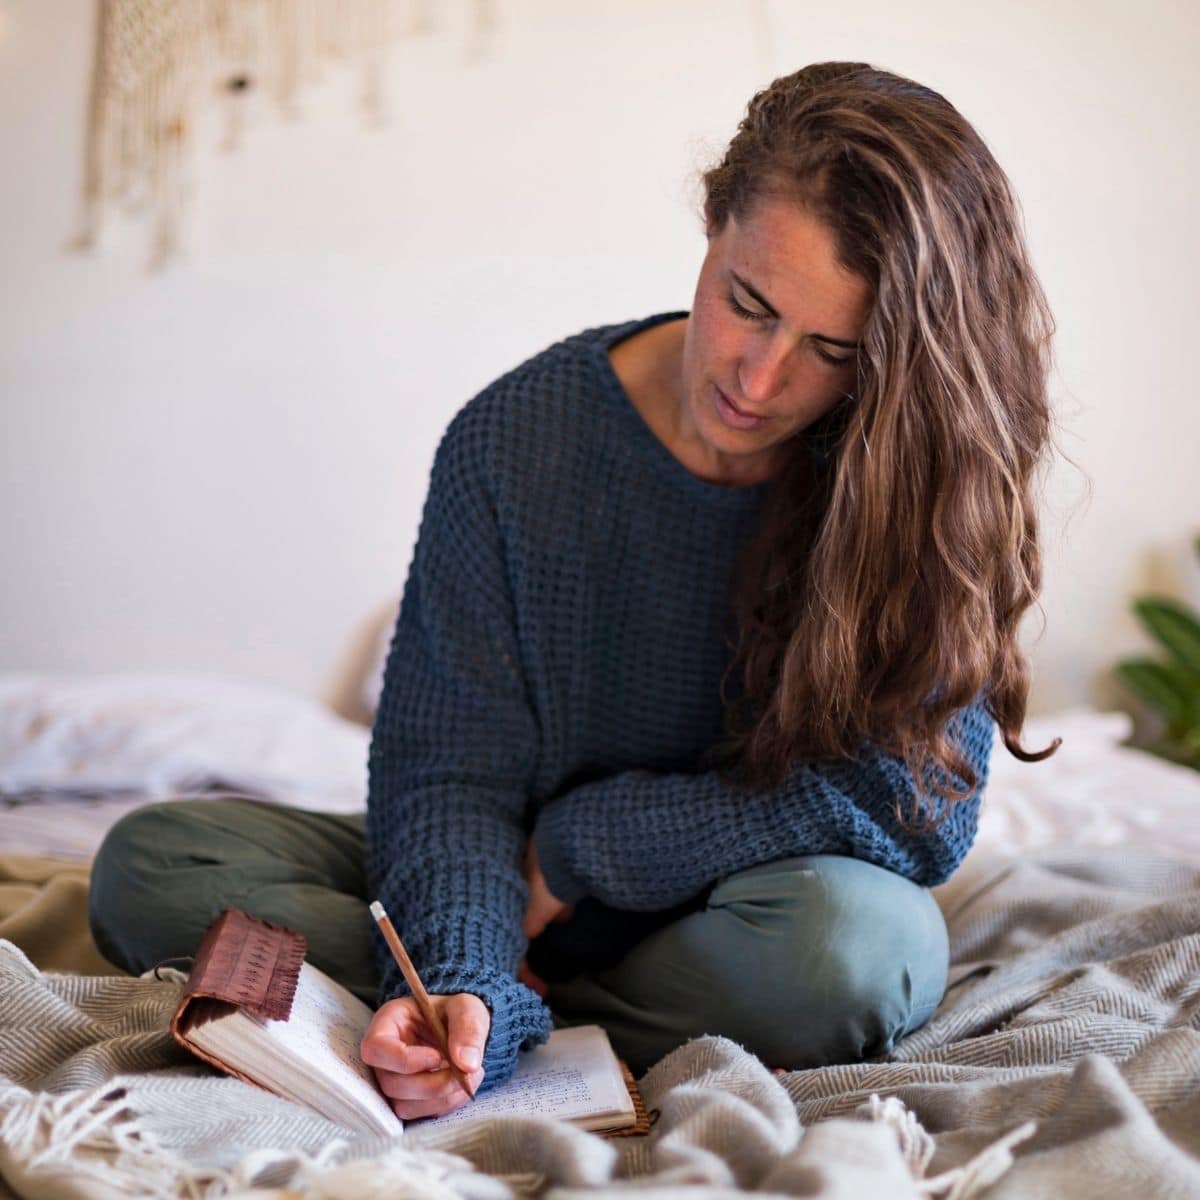 A woman with long brown hair writing in a journal while sitting on the bed.